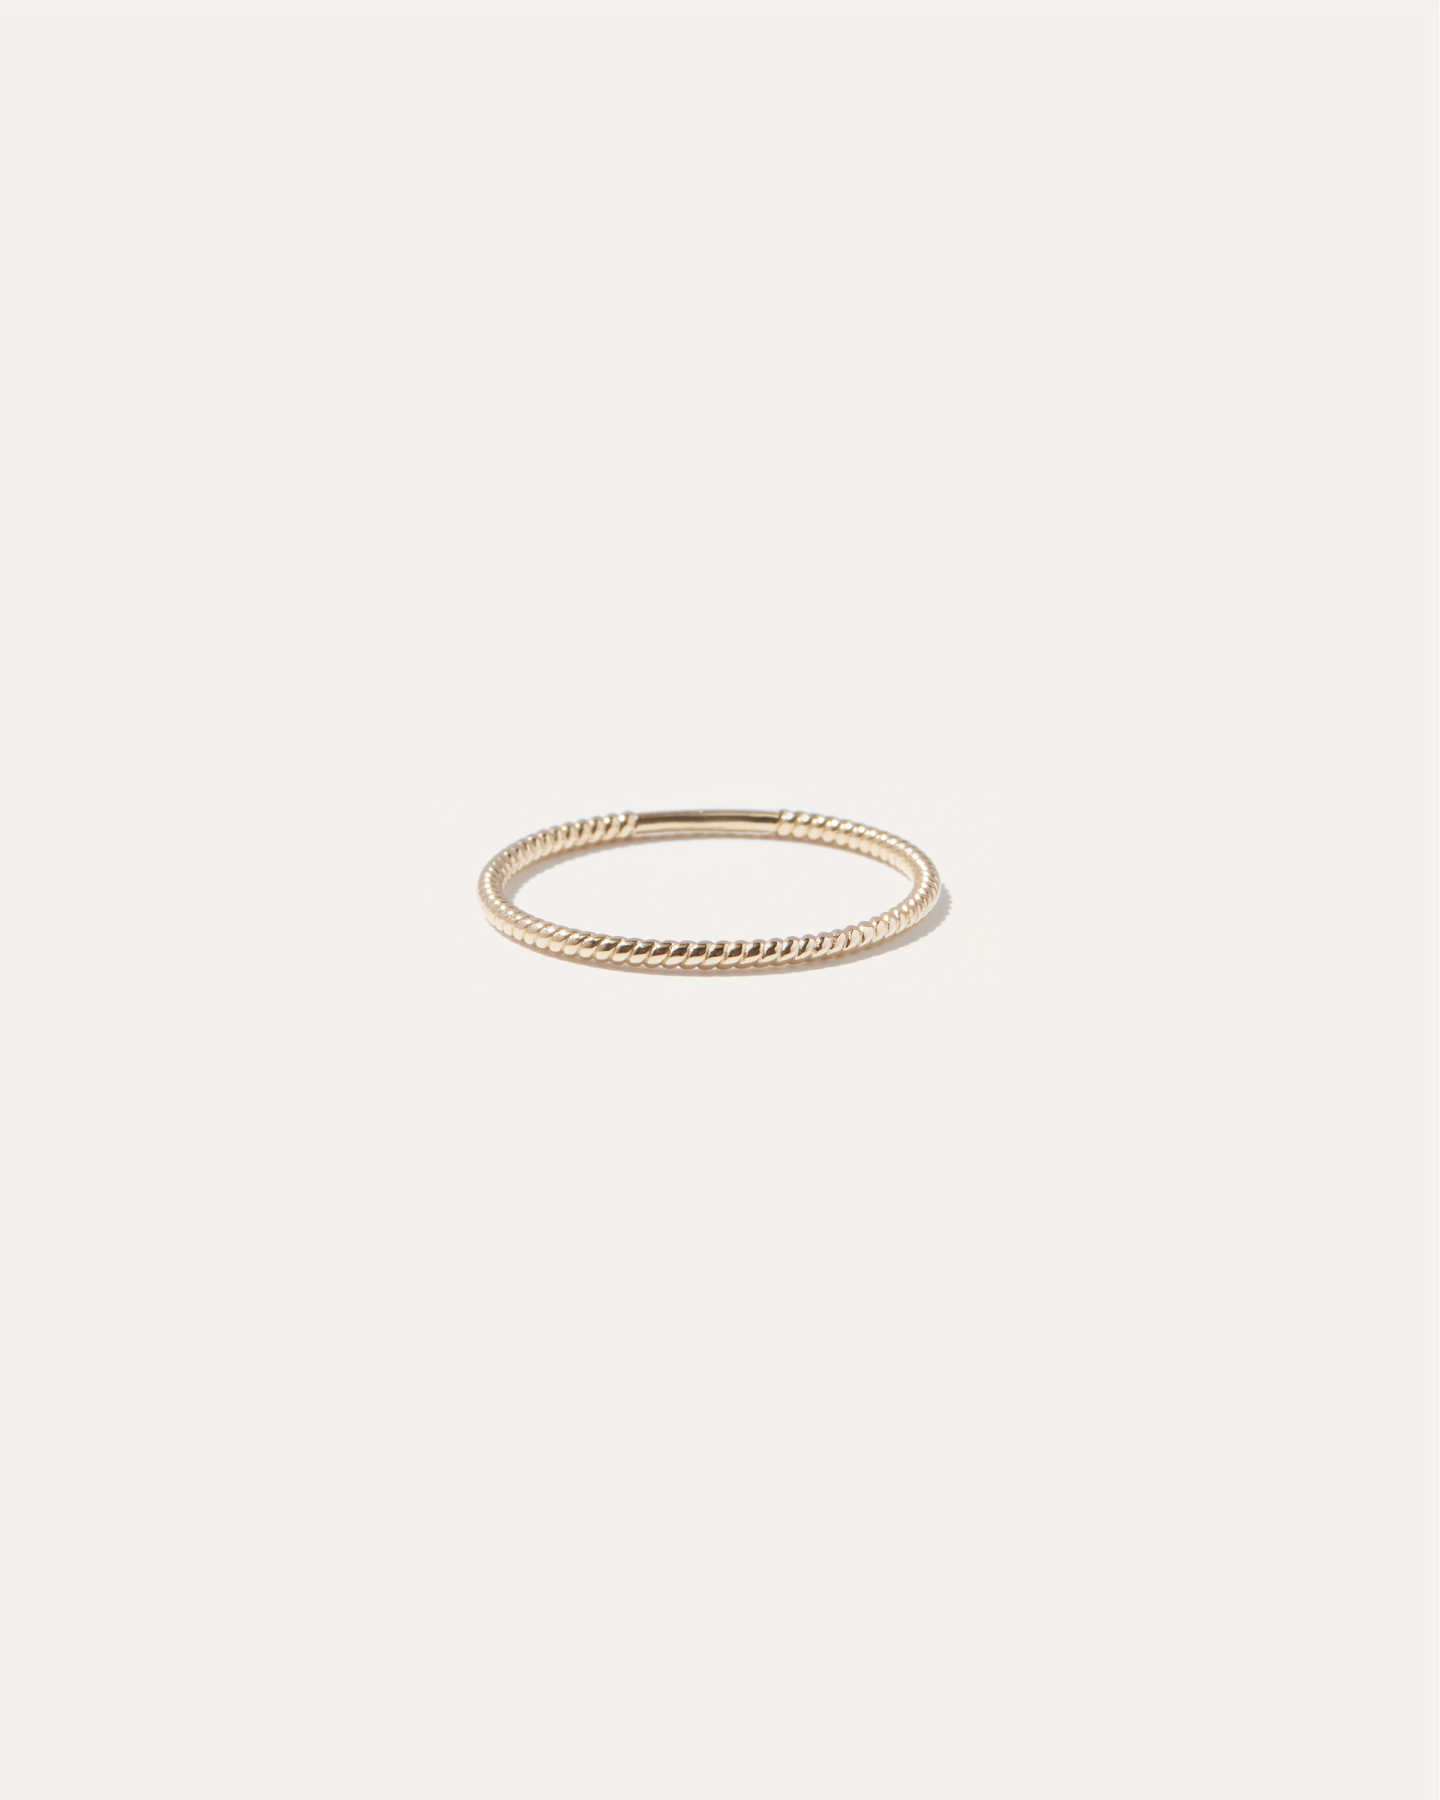 You May Also Like - 14k Gold Twist Ring - Yellow Gold